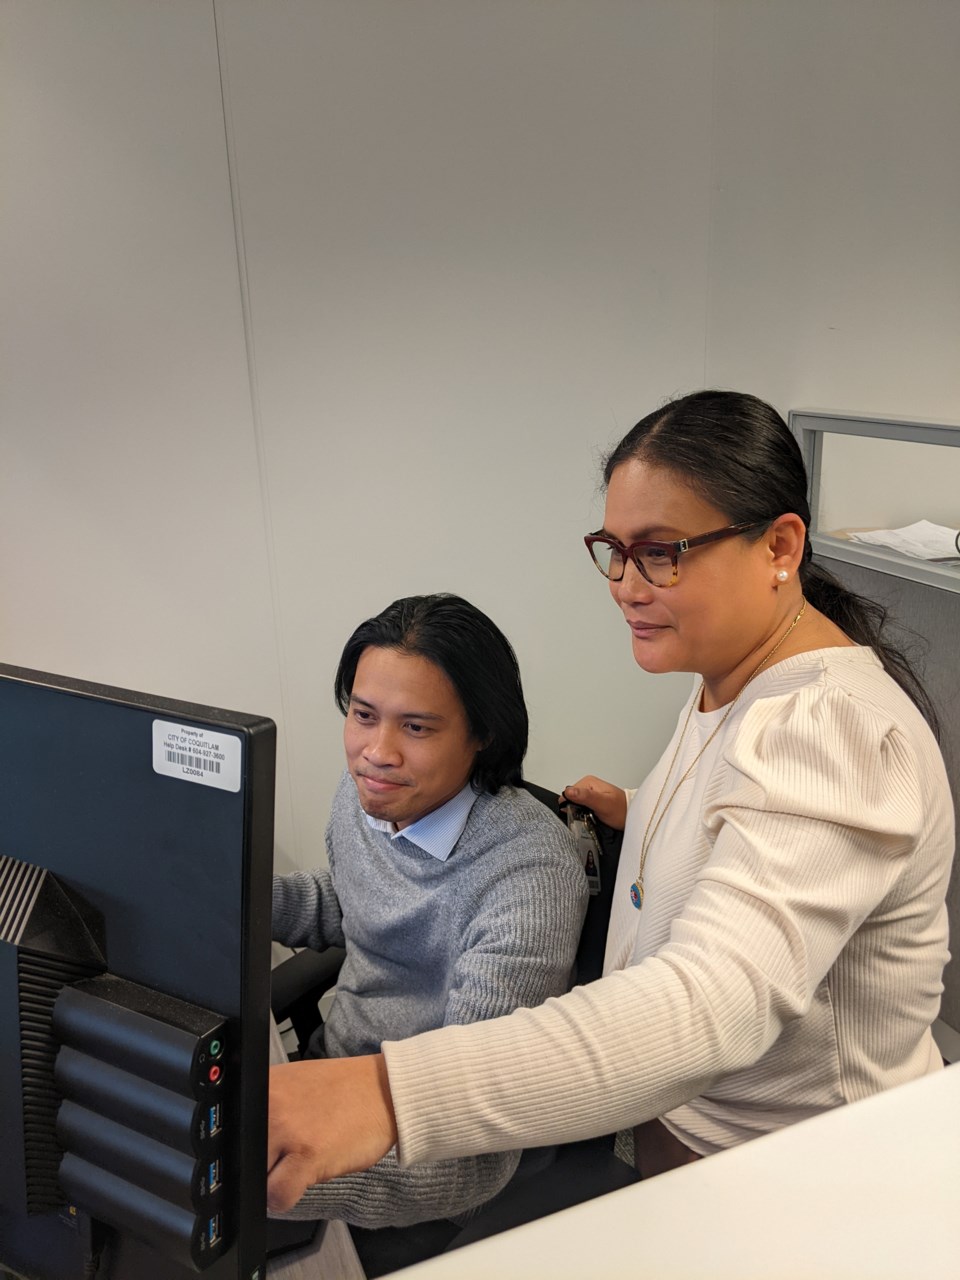 An image of Infrastructure Manager Darlene Soque in a white shirt standing beside a colleague in a gray sweater who is sitting behind a computer. Darlene’s left arm is raised to point to something that is on the screen in the image.